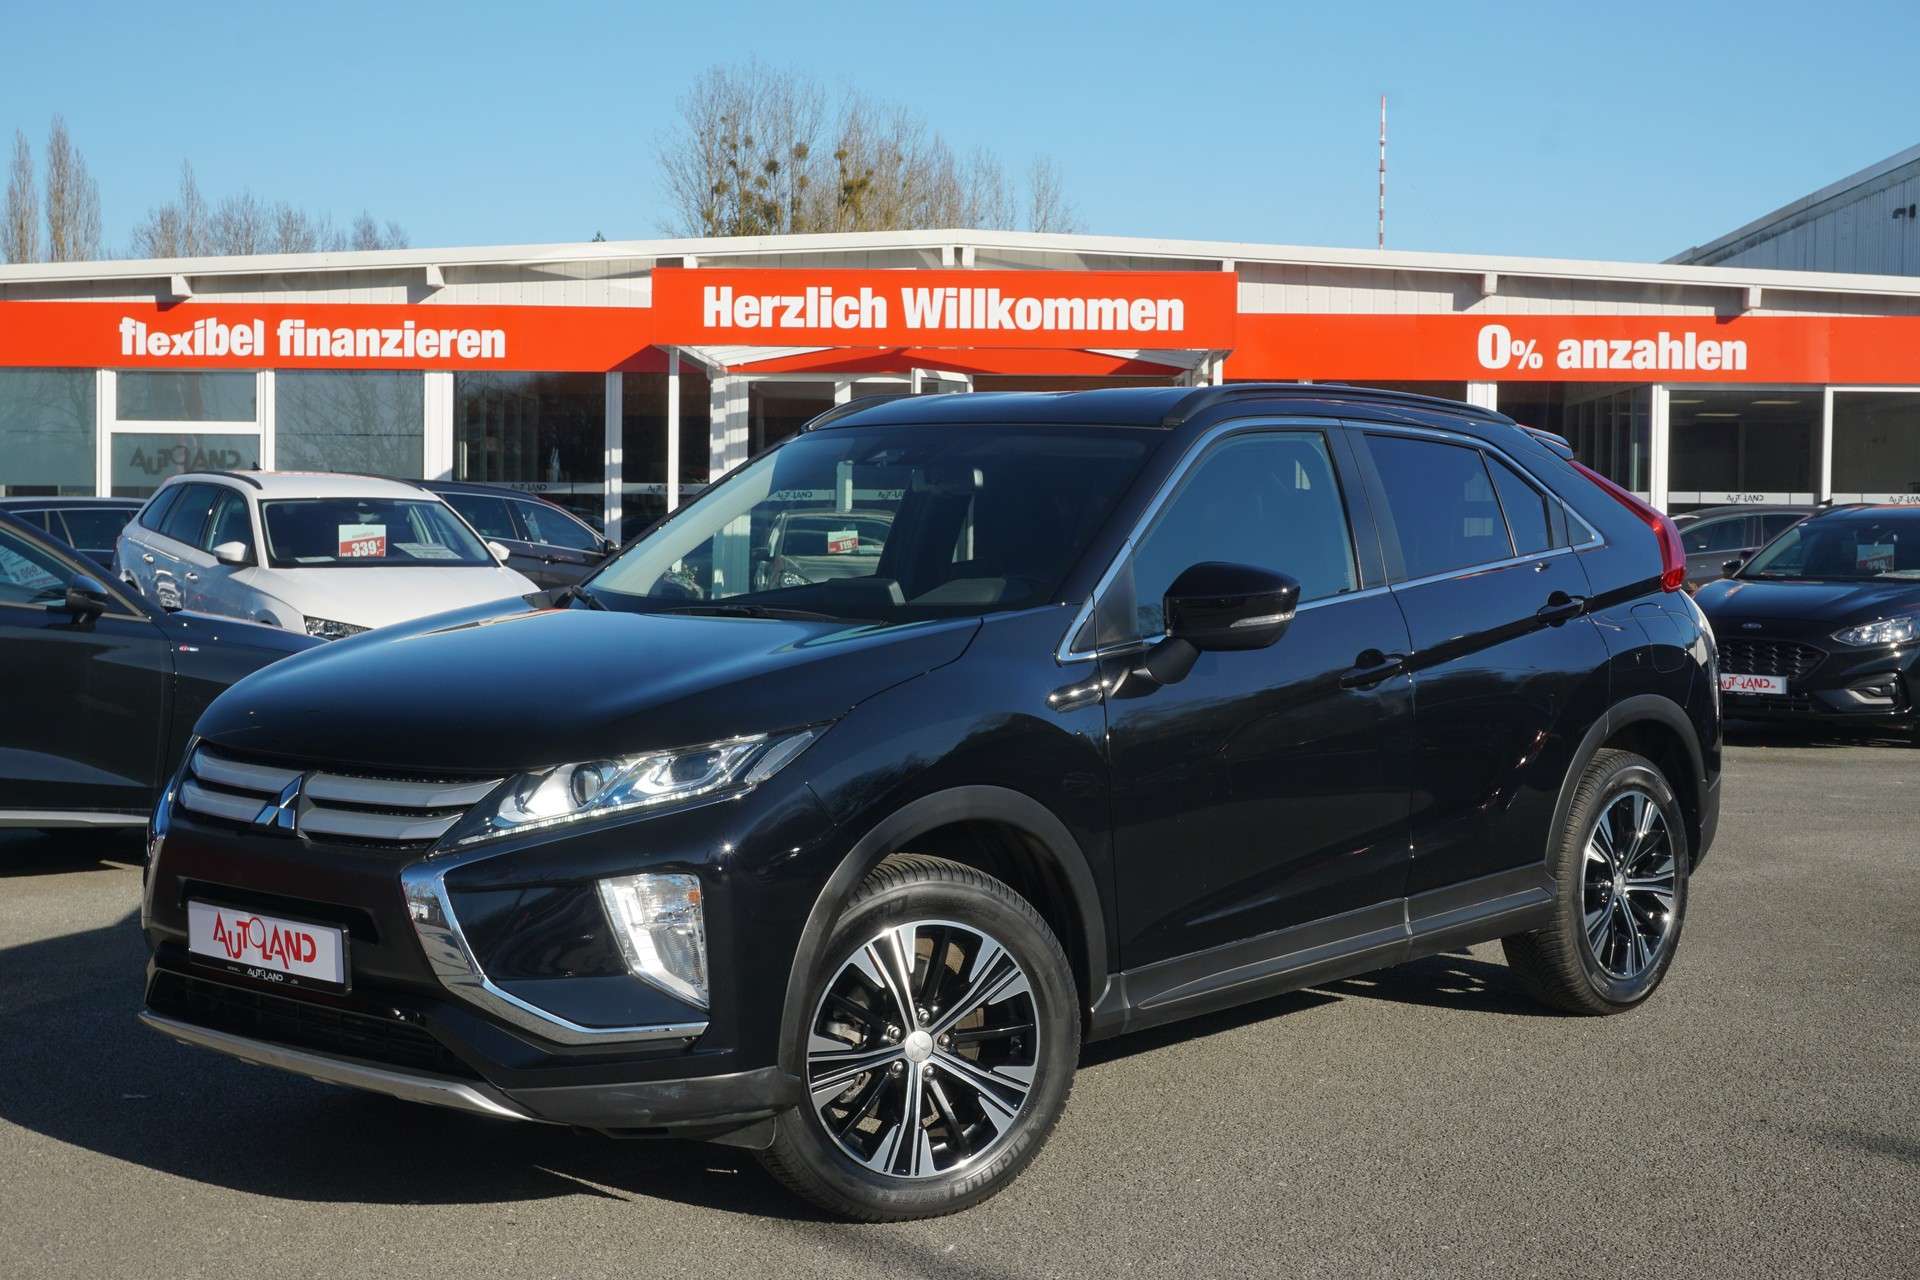 Mitsubishi Eclipse Cross Off-Road/Pick-up in Black used in Schwerin for € 23,900.-